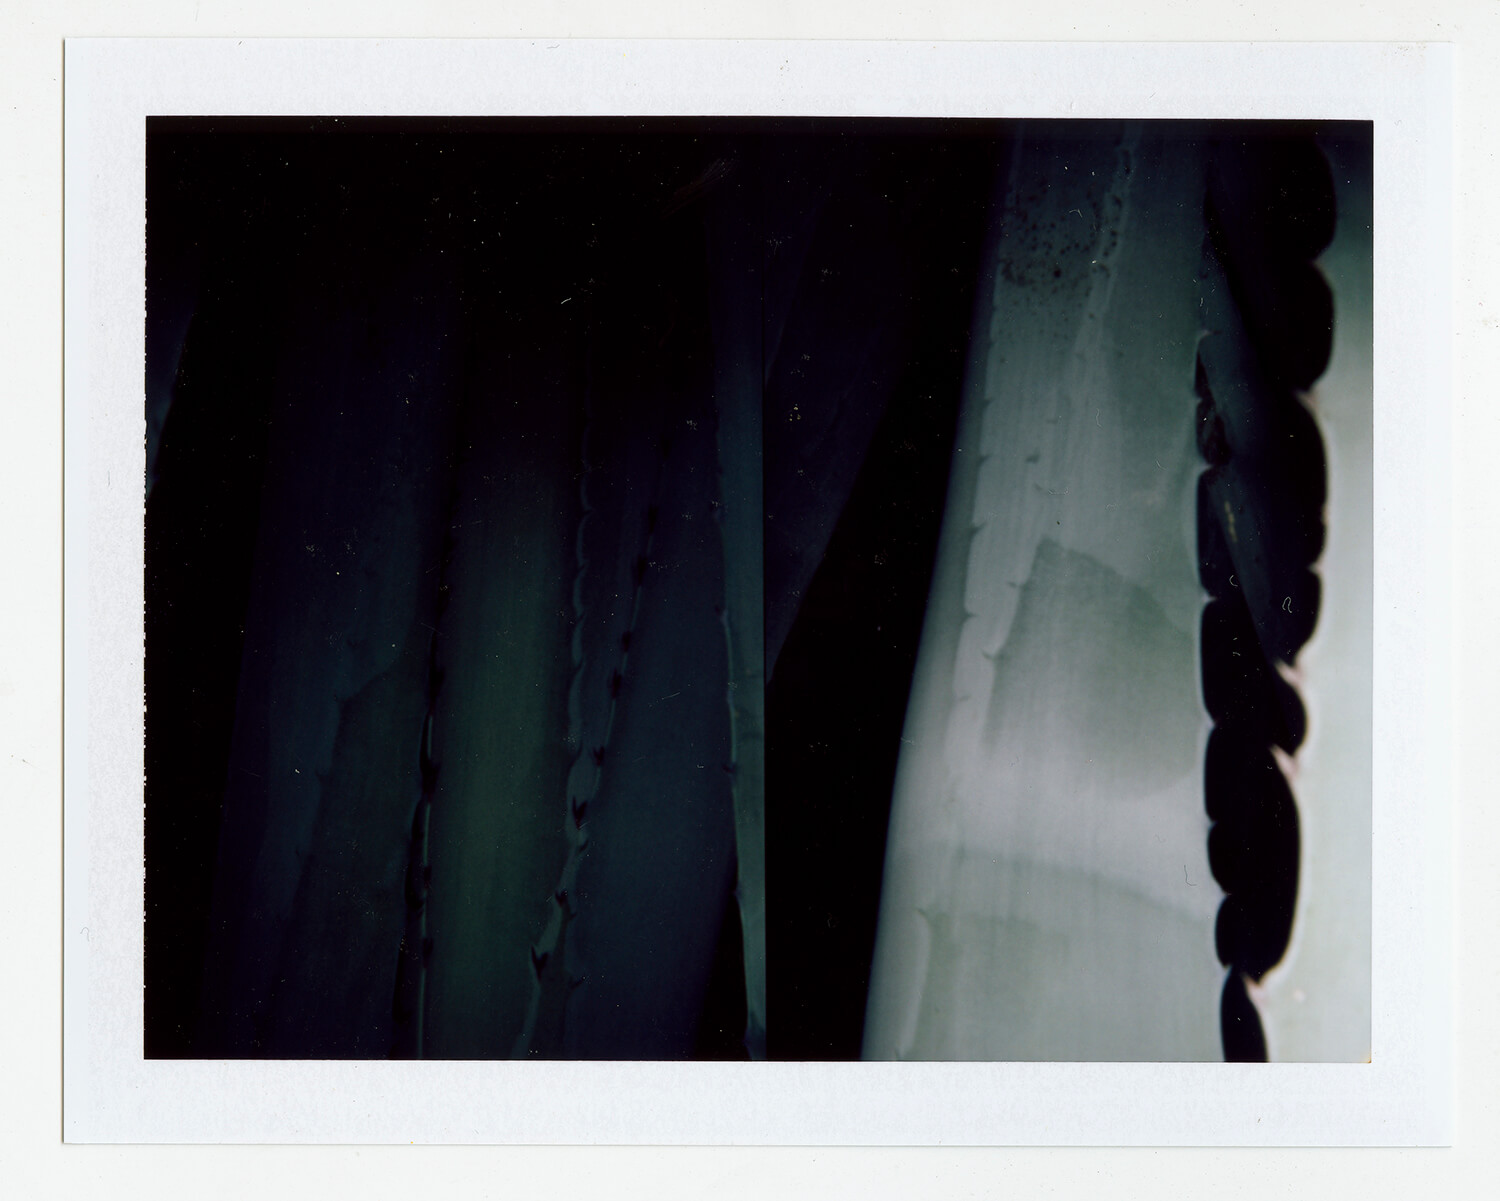  I.D.065, The Polaroid Revolutionary Workers, 2013, Polaroid Picture, 107mm x 86mm 